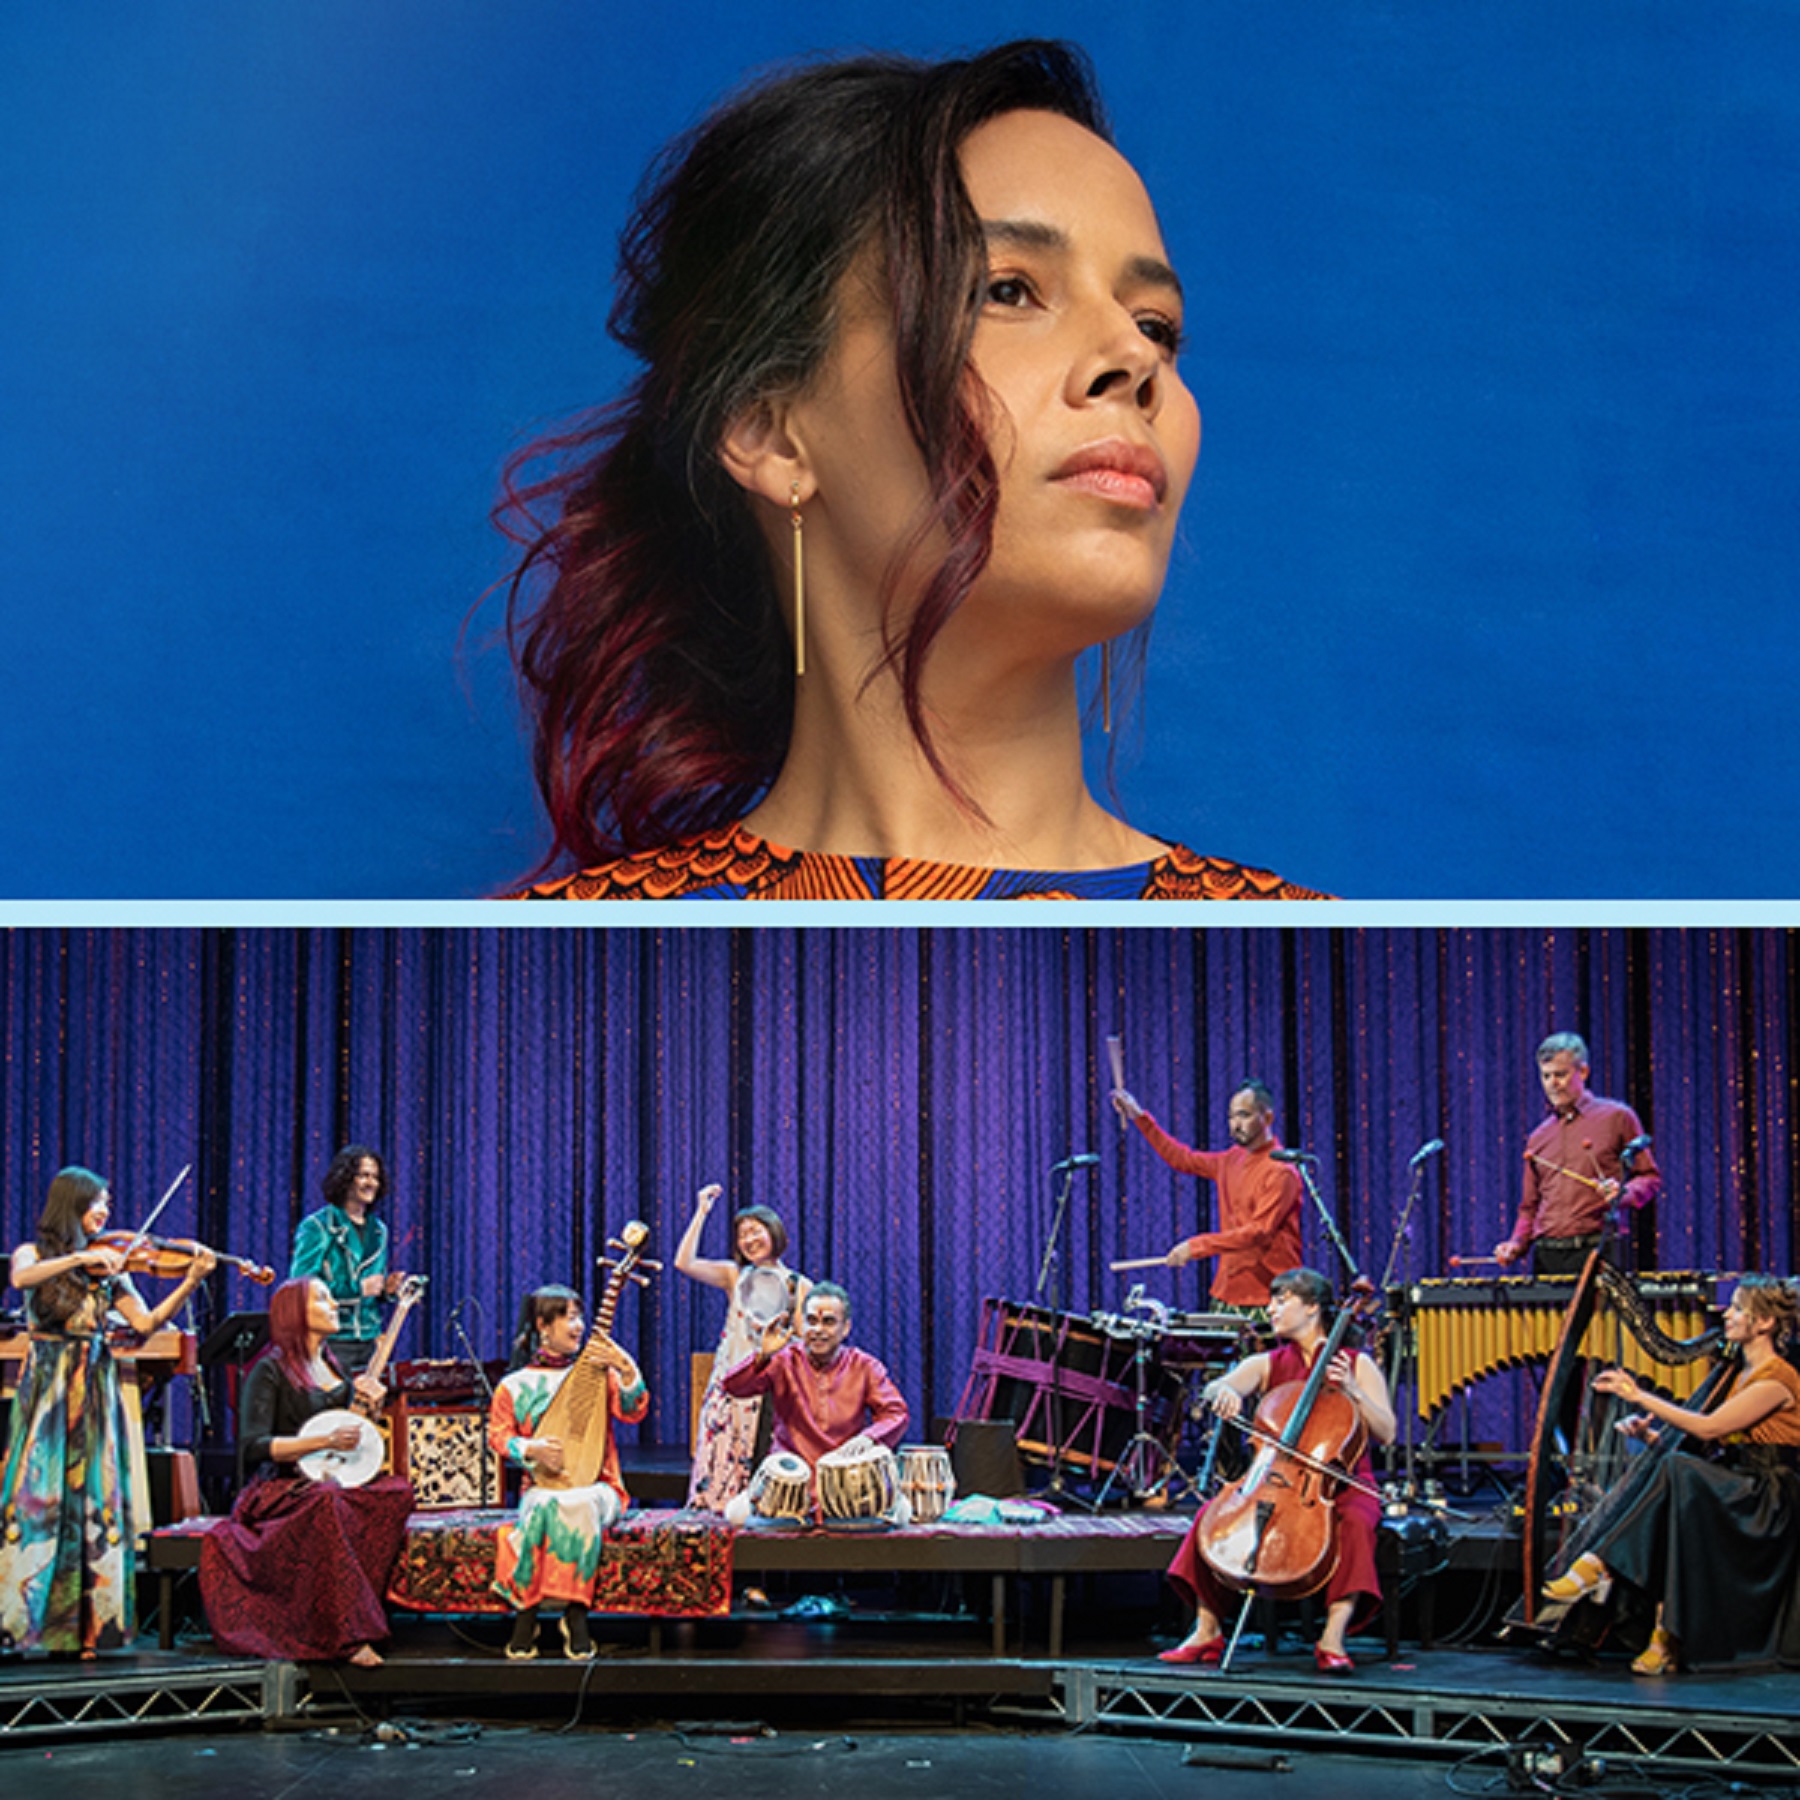 Music Worcester presents Silkroad Ensemble featuring Rhiannon Giddens at Indian Ranch July 27th